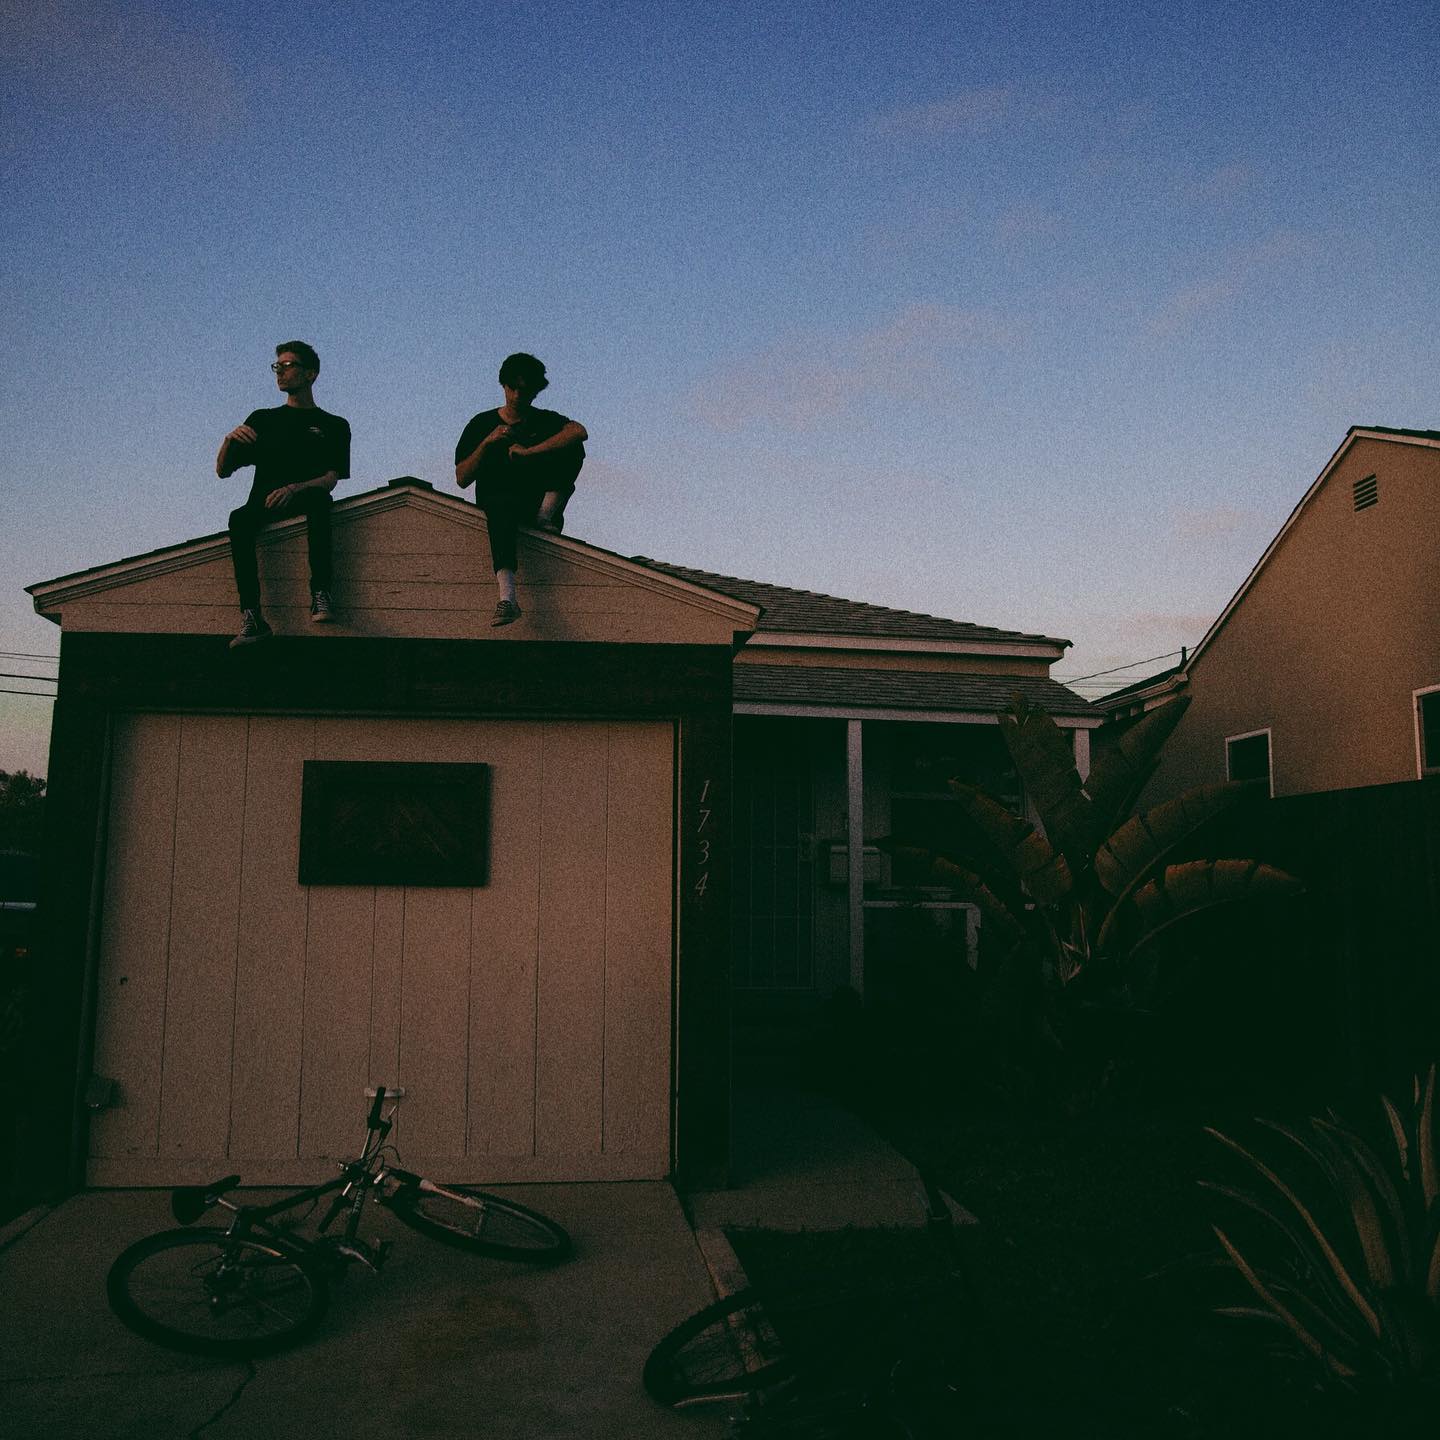 band members sitting on a rootop at sunset